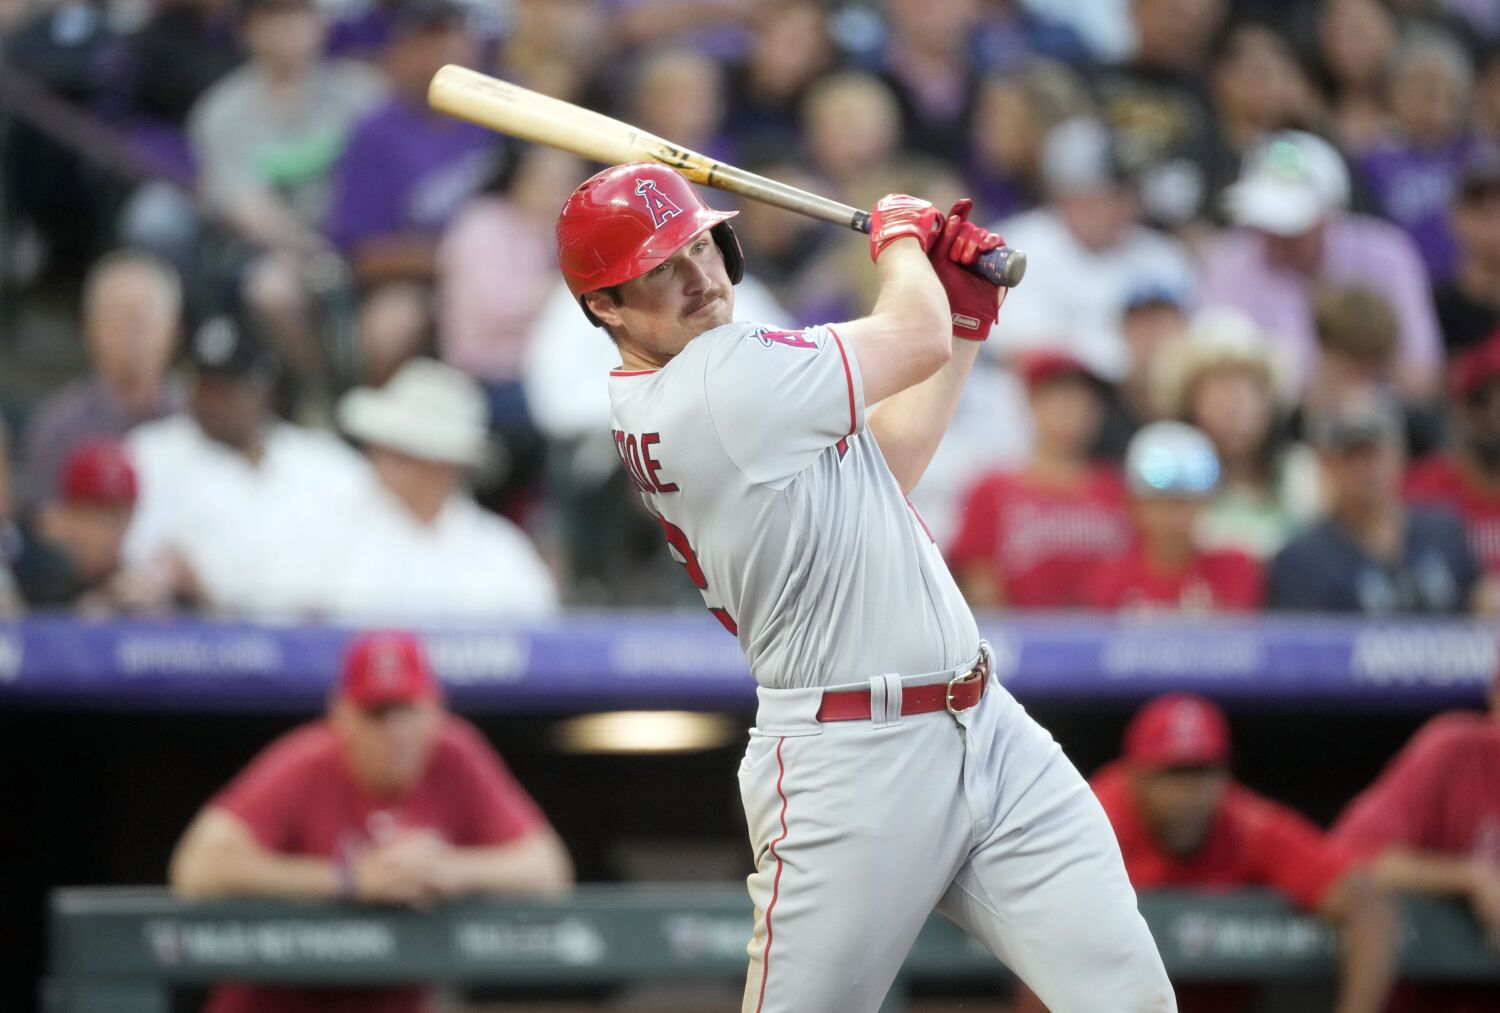 21 things to know about the Angels' 25-1 win over the Rockies